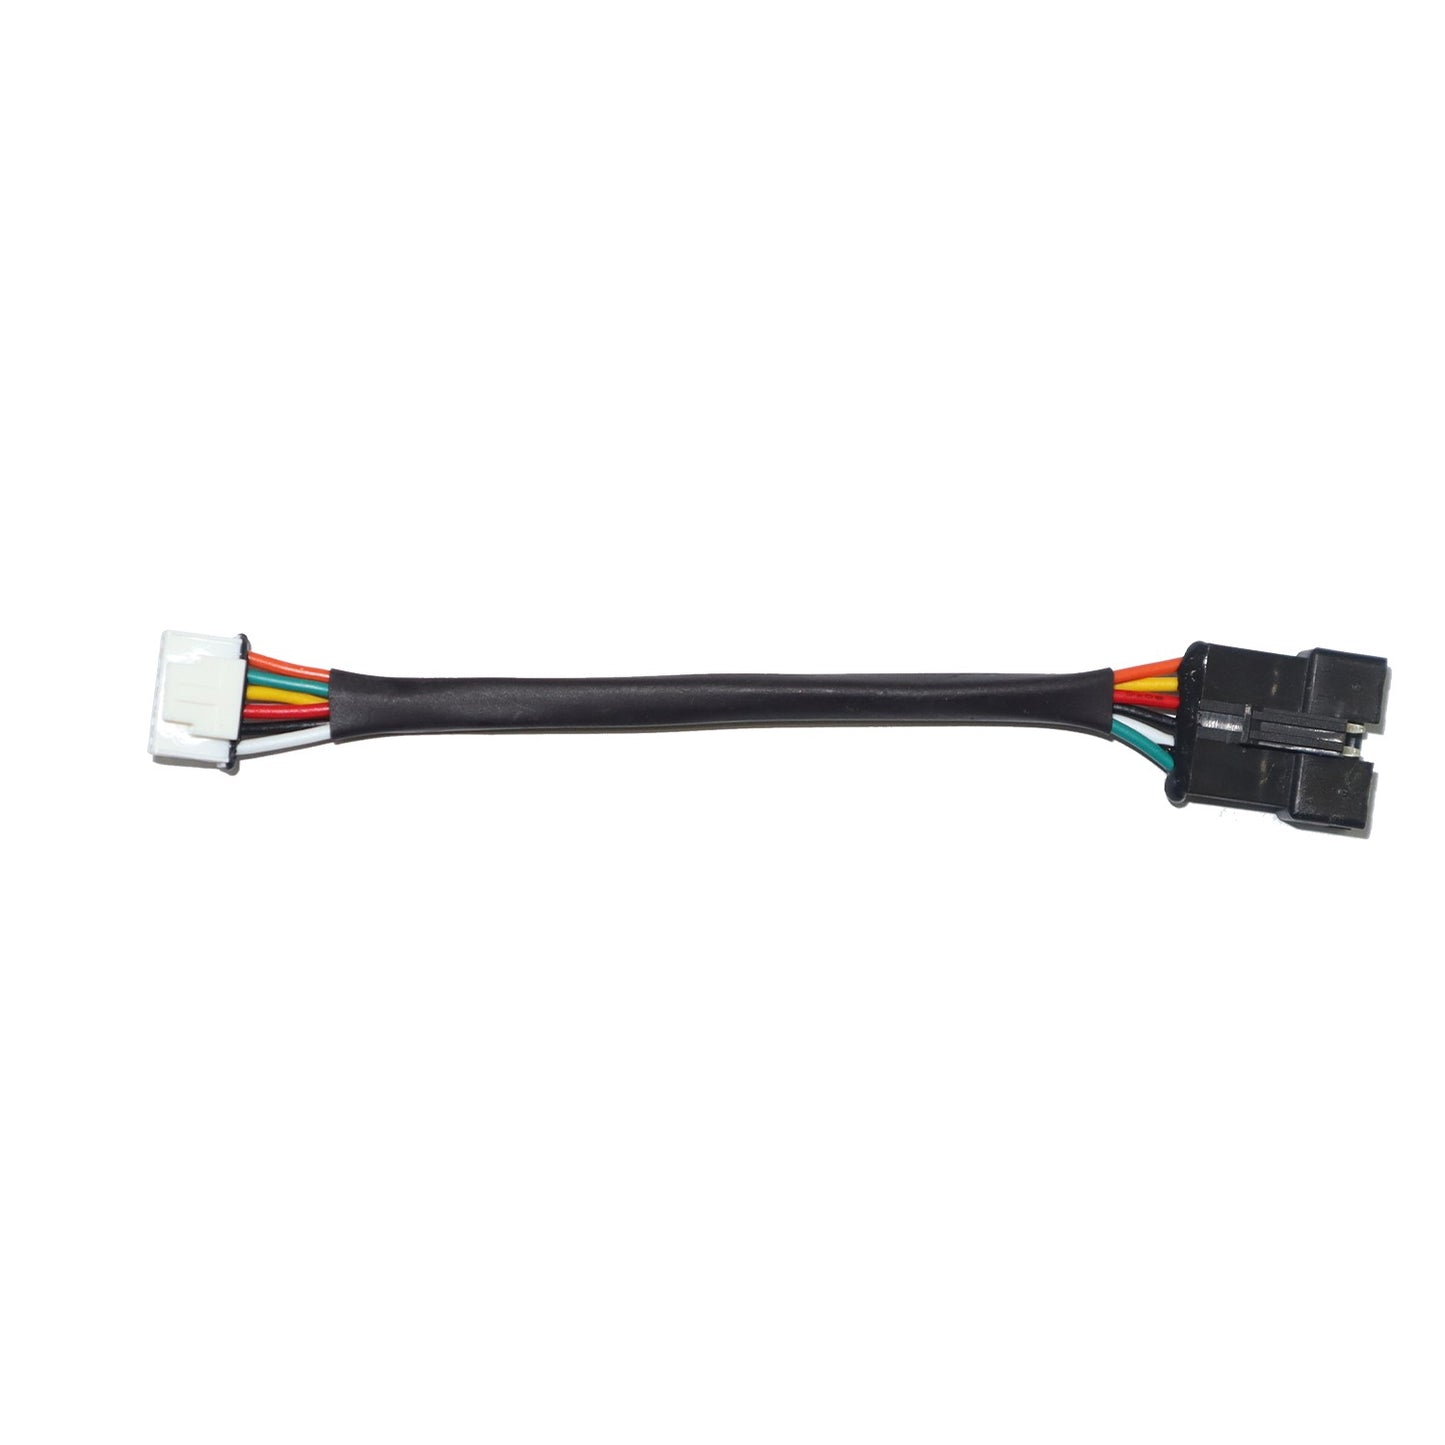 Hiboy S2 S2 Pro V2 adapter switching cable